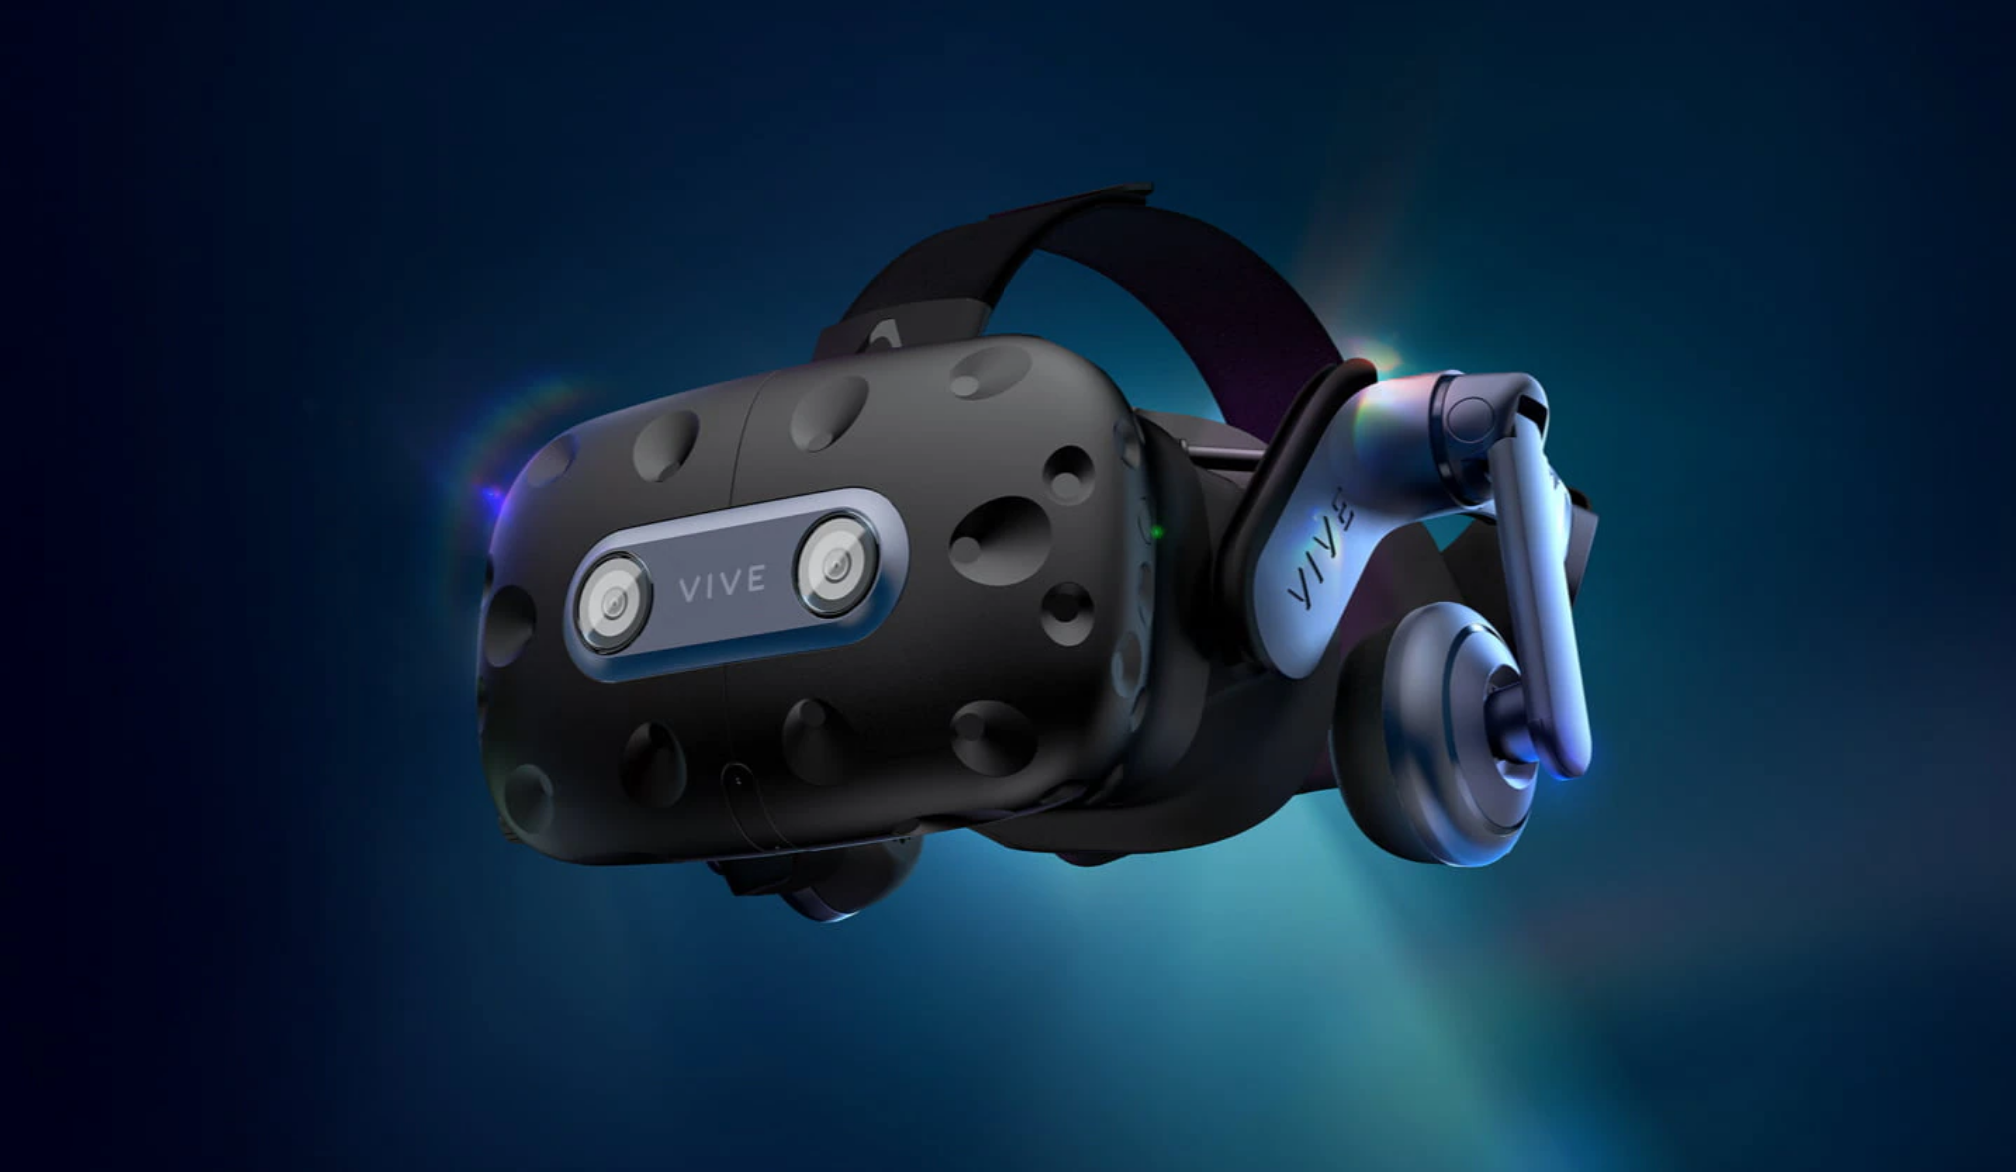 Deal | Get US$225 off HTC Vive Professional 2 digital actuality headset this cyber weekend